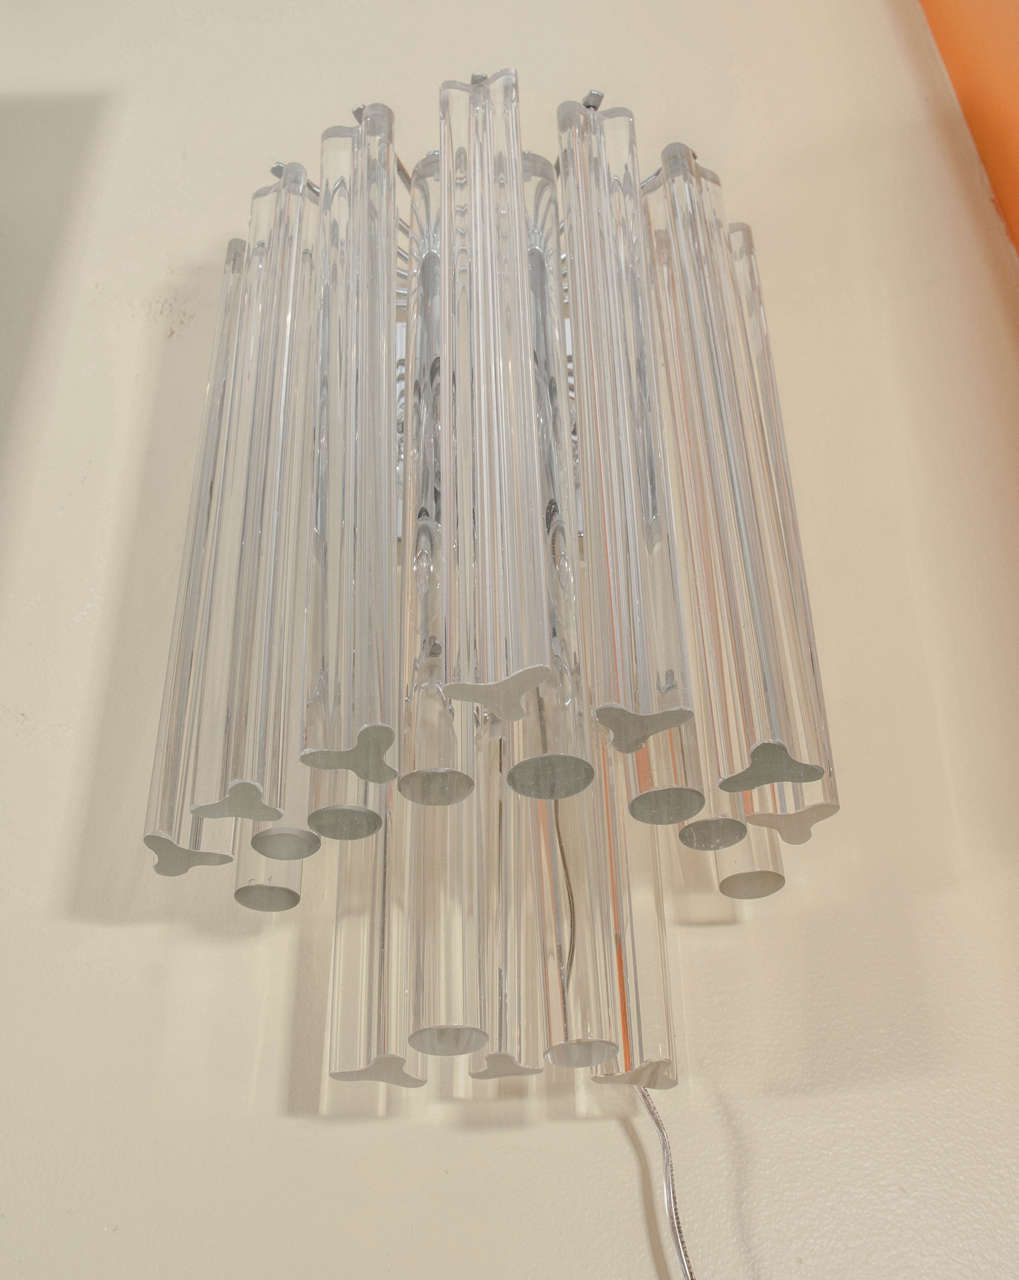 Beautiful single wall sconce with two tiers of venini crystals: some of the crystals are triede and some are the uncommon round rods. Chrome armature. Please contact for location.